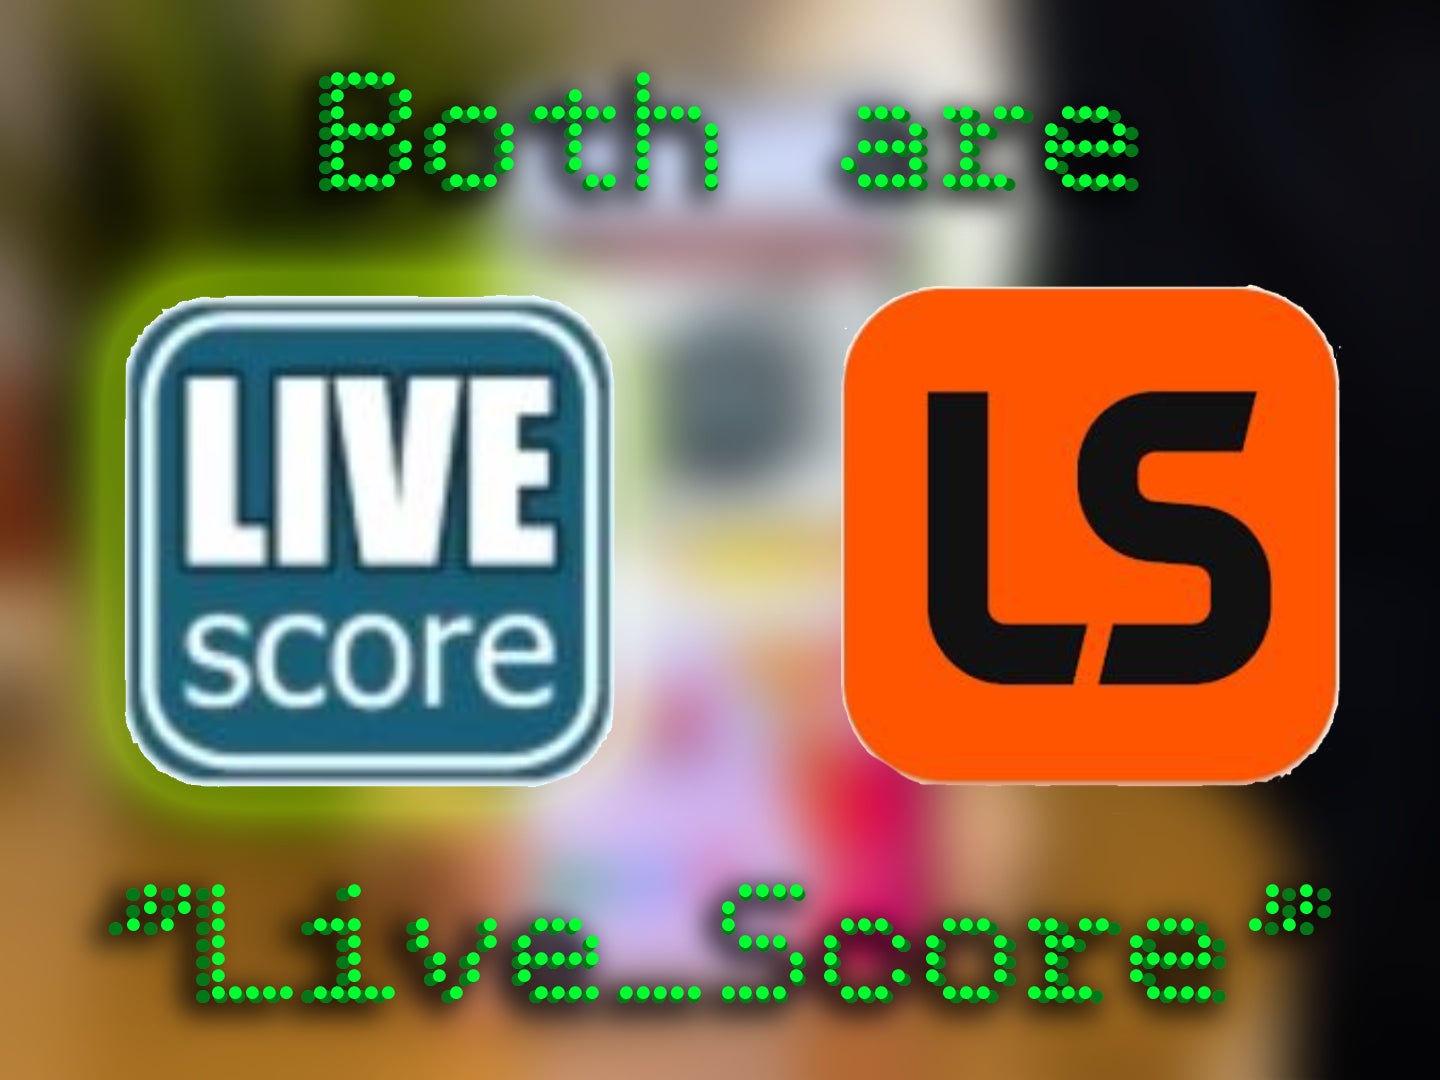 If you want to download the real Live Score app, you’ll have to do some digging and make sure that you are getting the right one. - Malware apps on Android? Do this to keep your phone safe